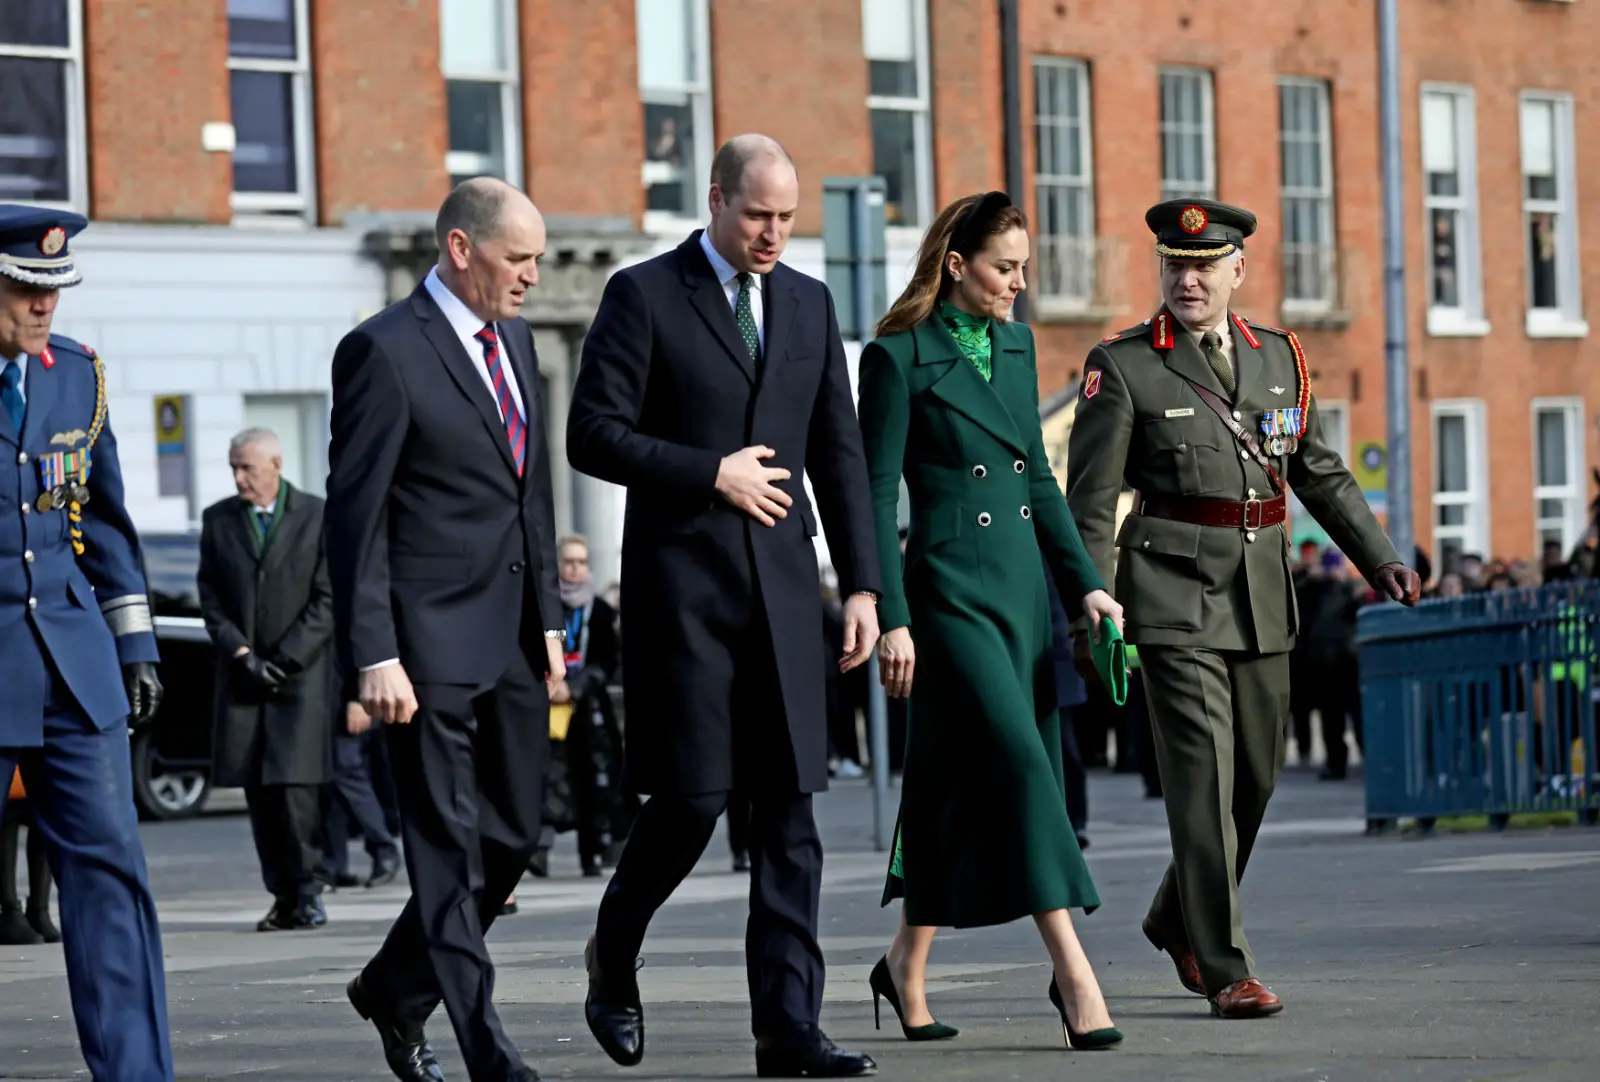 The Duke and Duchess of Cambridge visited the Garden of Remembrance during Ireland visit